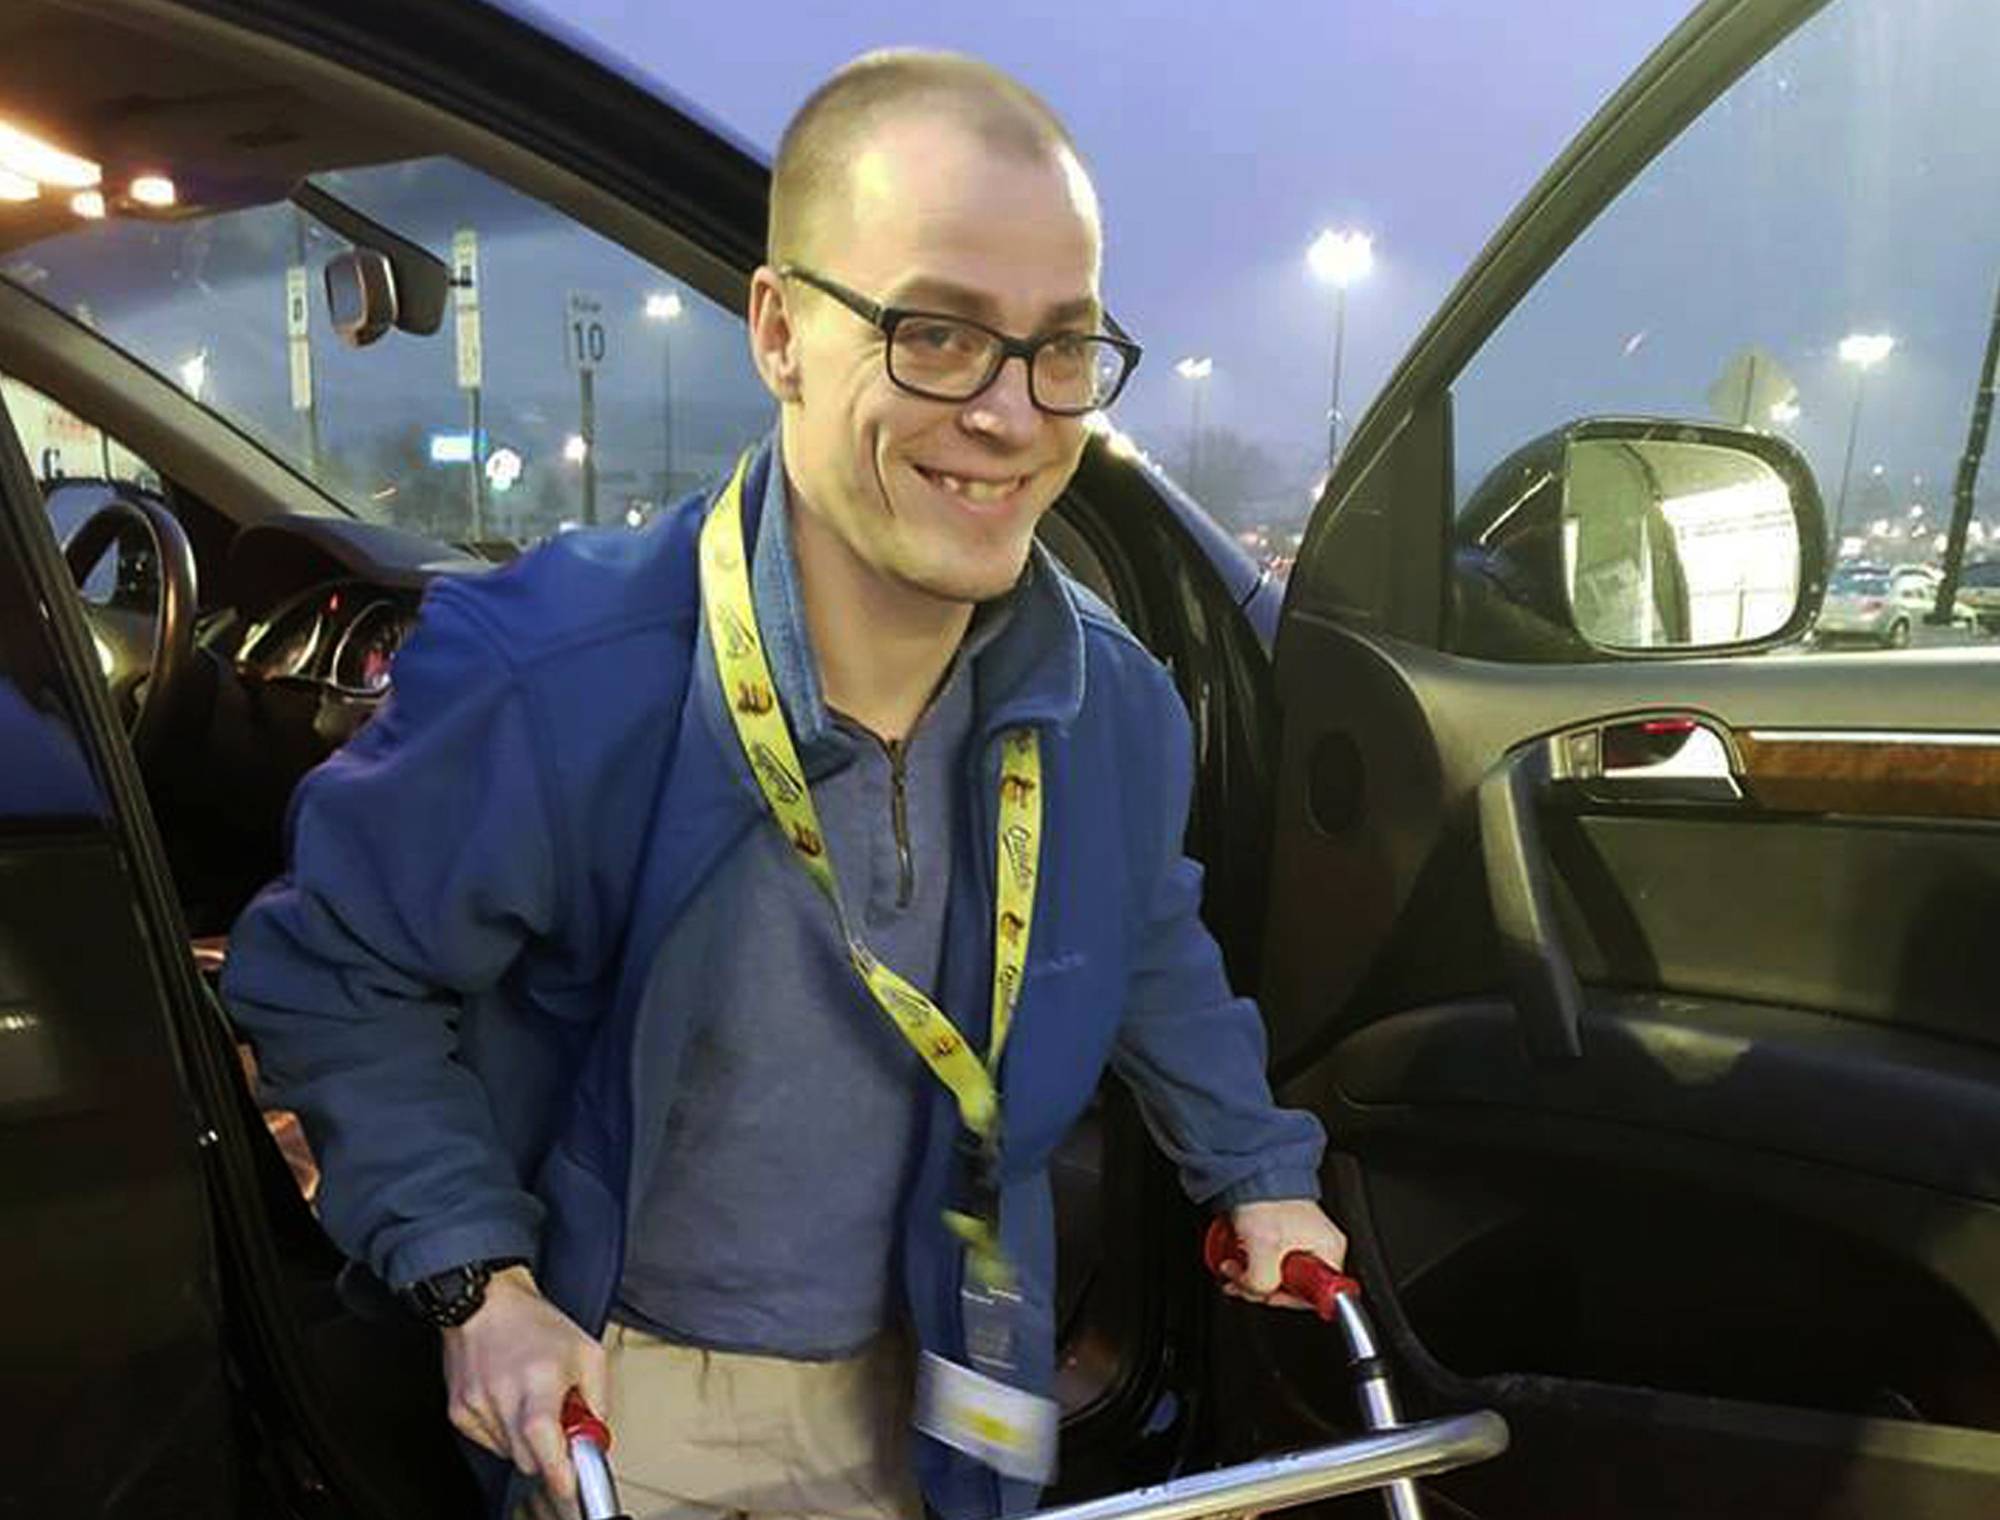 In this Dec. 14, 2018 photo provided by Holly Catlin, Adam Catlin gets out of a car before starting his shift at a Walmart in Selinsgrove, Pa. Catlin, who has cerebral palsy, is afraid he'll be out of work after store officials changed his job description to add tasks that he's physically unable to do. (Holly Catlin via AP)